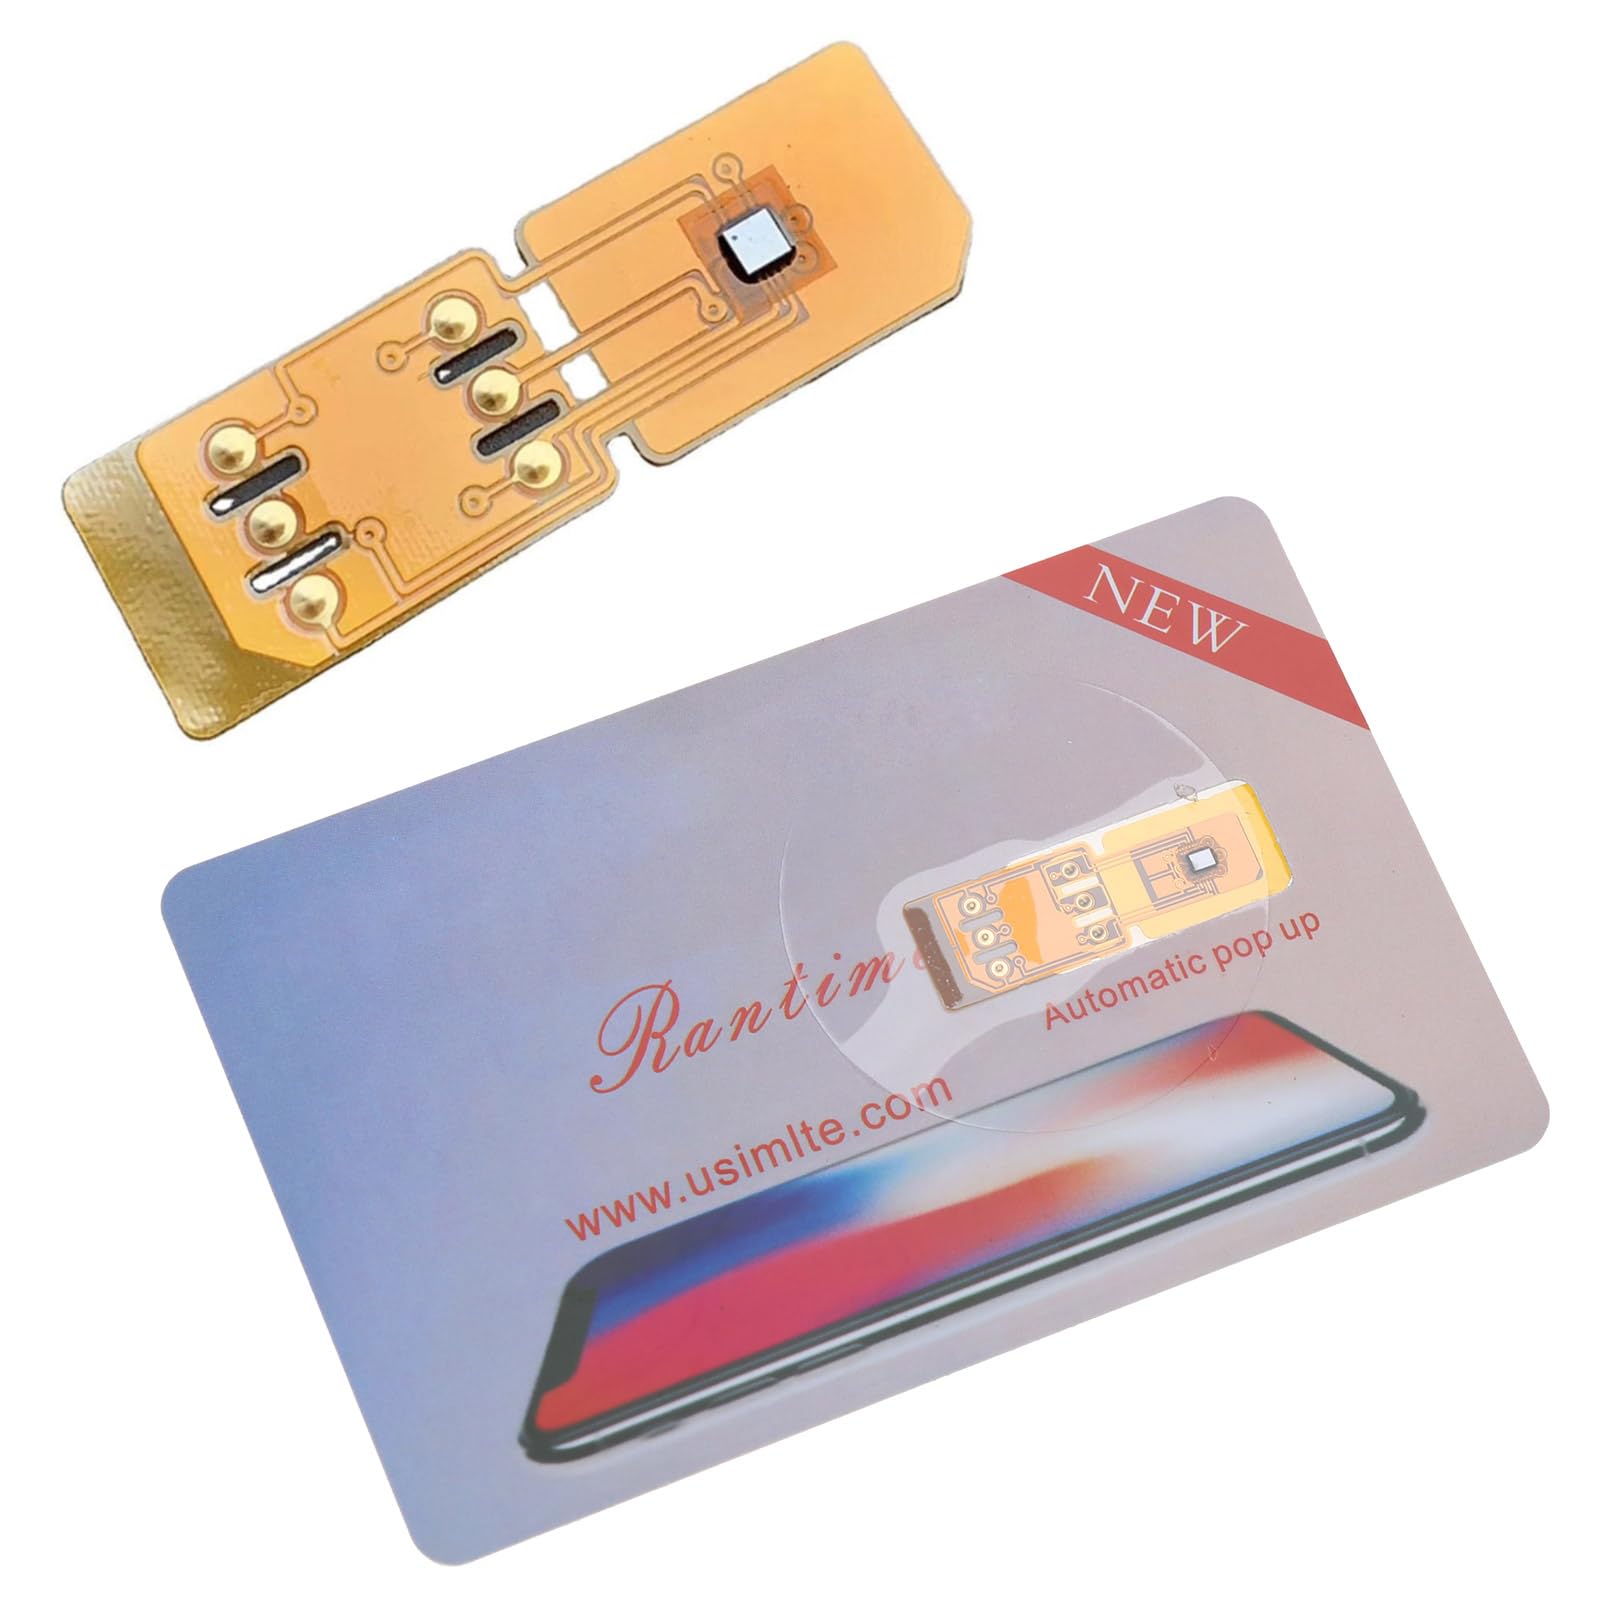 Usim 4GPro Unlock SIM-Card for Phone13 12 11 Smart-Decodable Chip to SIM-Cards Cellphone Accessories